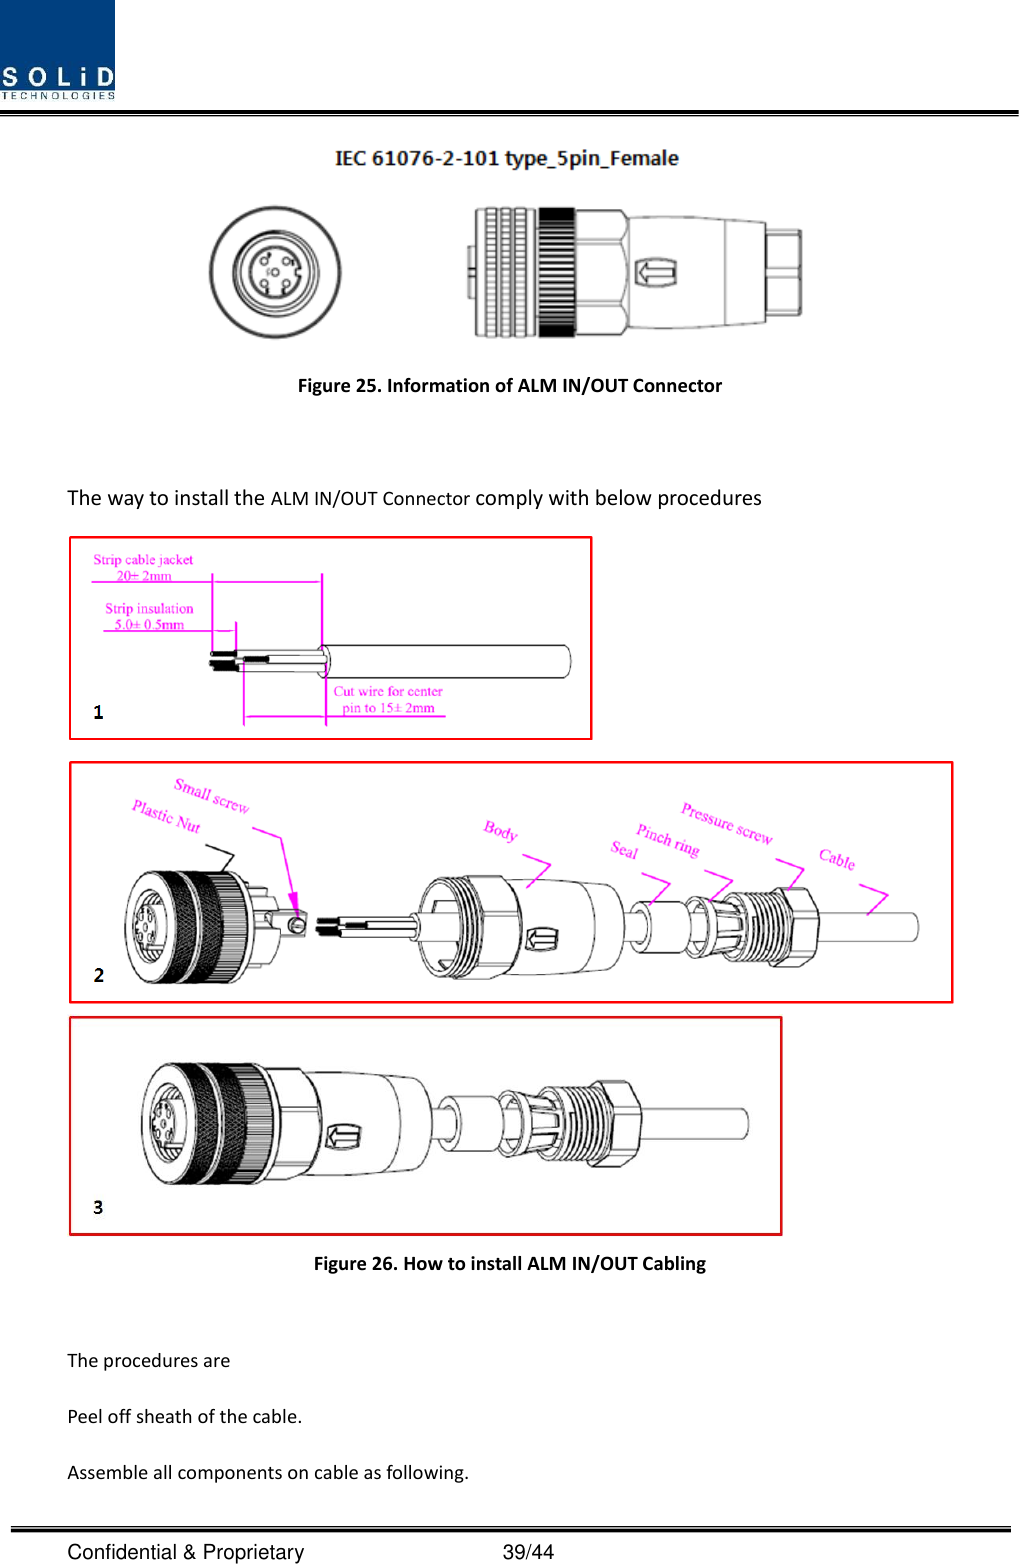  Confidential &amp; Proprietary                                      39/44  Figure 25. Information of ALM IN/OUT Connector  The way to install the ALM IN/OUT Connector comply with below procedures    Figure 26. How to install ALM IN/OUT Cabling  The procedures are Peel off sheath of the cable. Assemble all components on cable as following. 